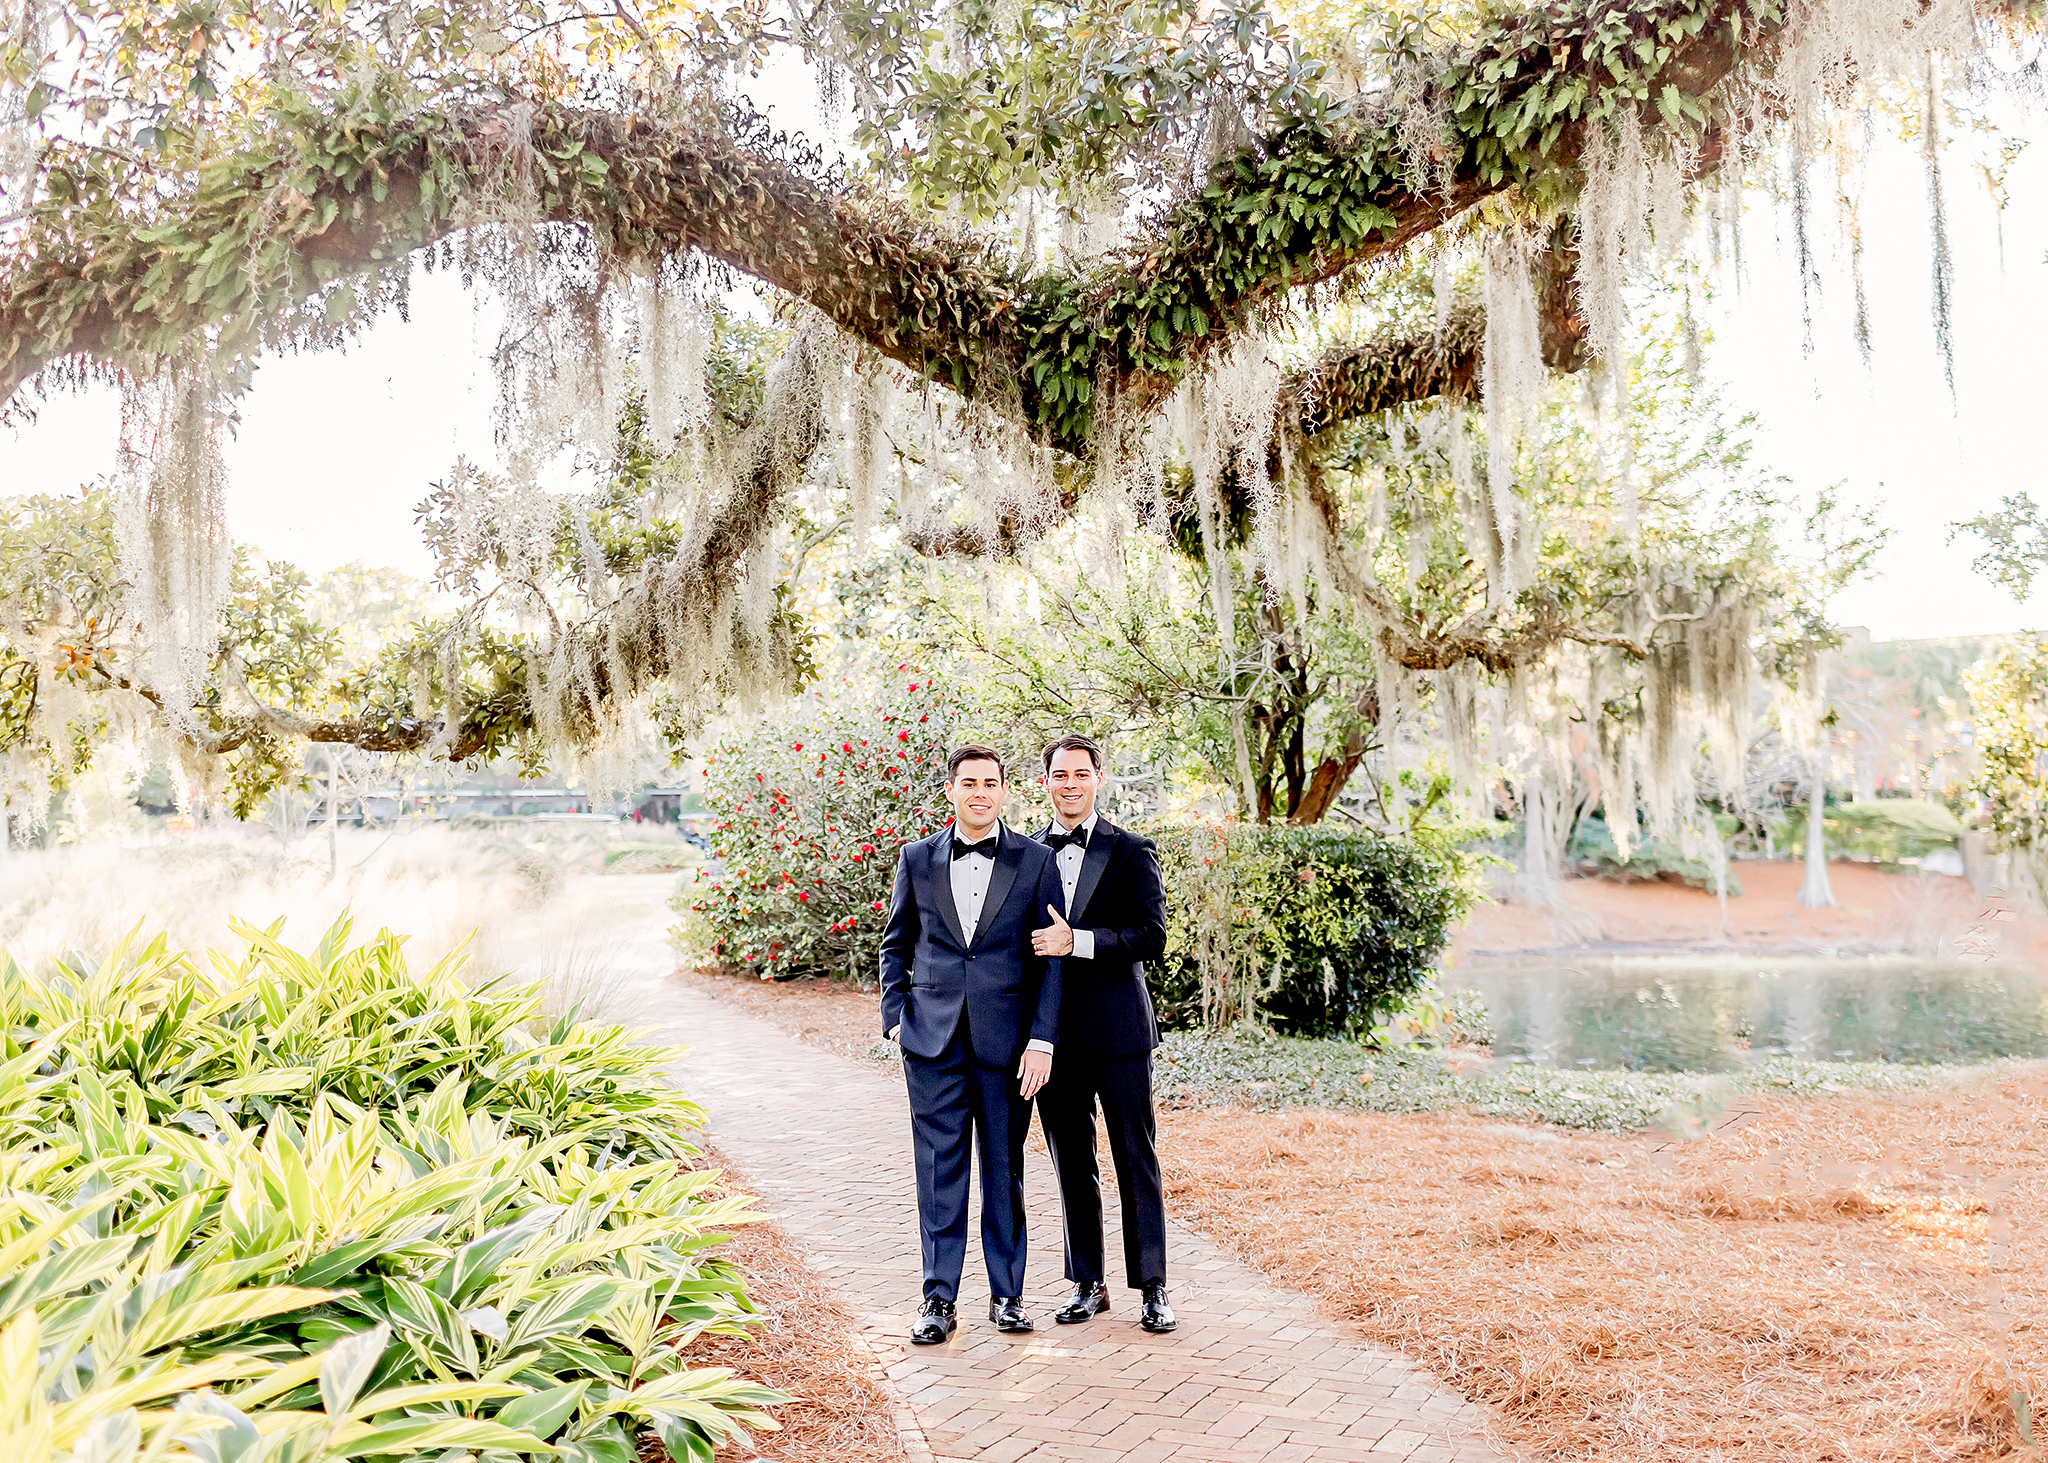 Fairhope wedding captured beautifully by timeless photographer